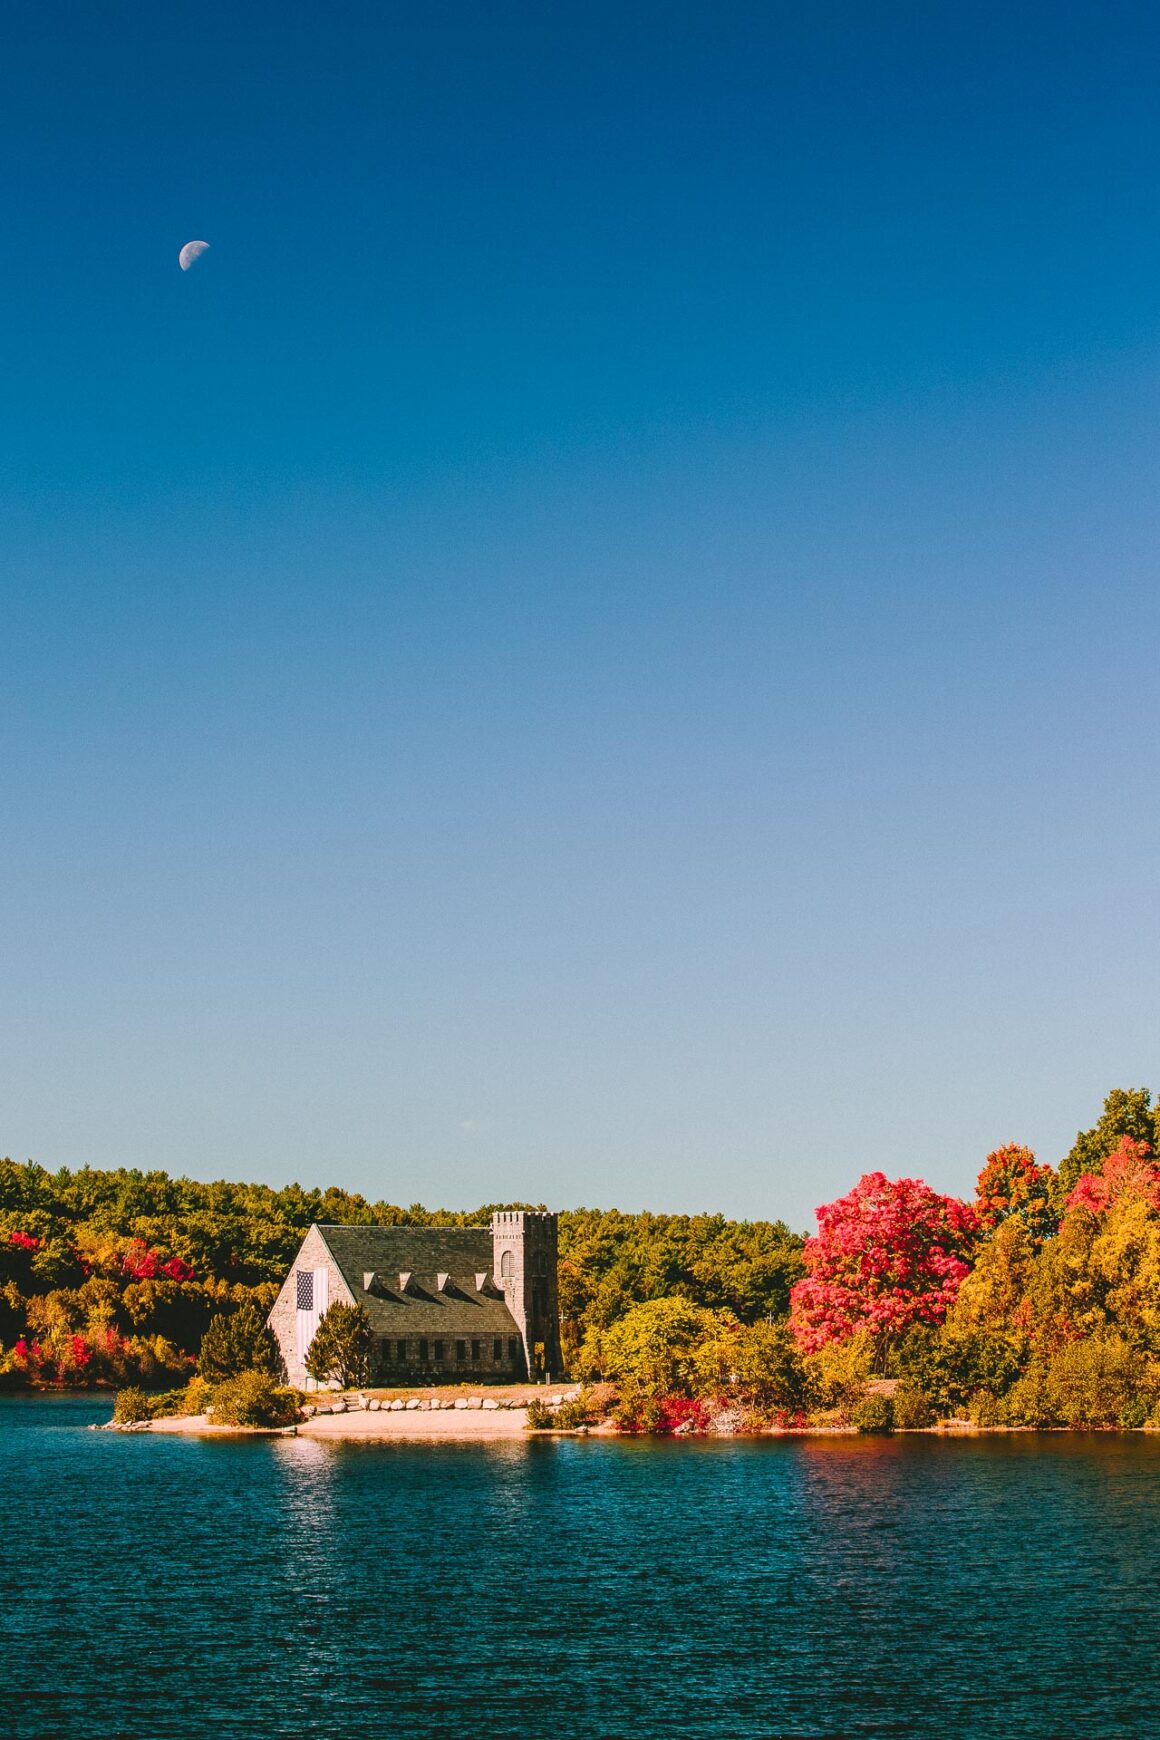 The Old Stone Church along the shore of the Wachusett Reservoir with Fall Foliage